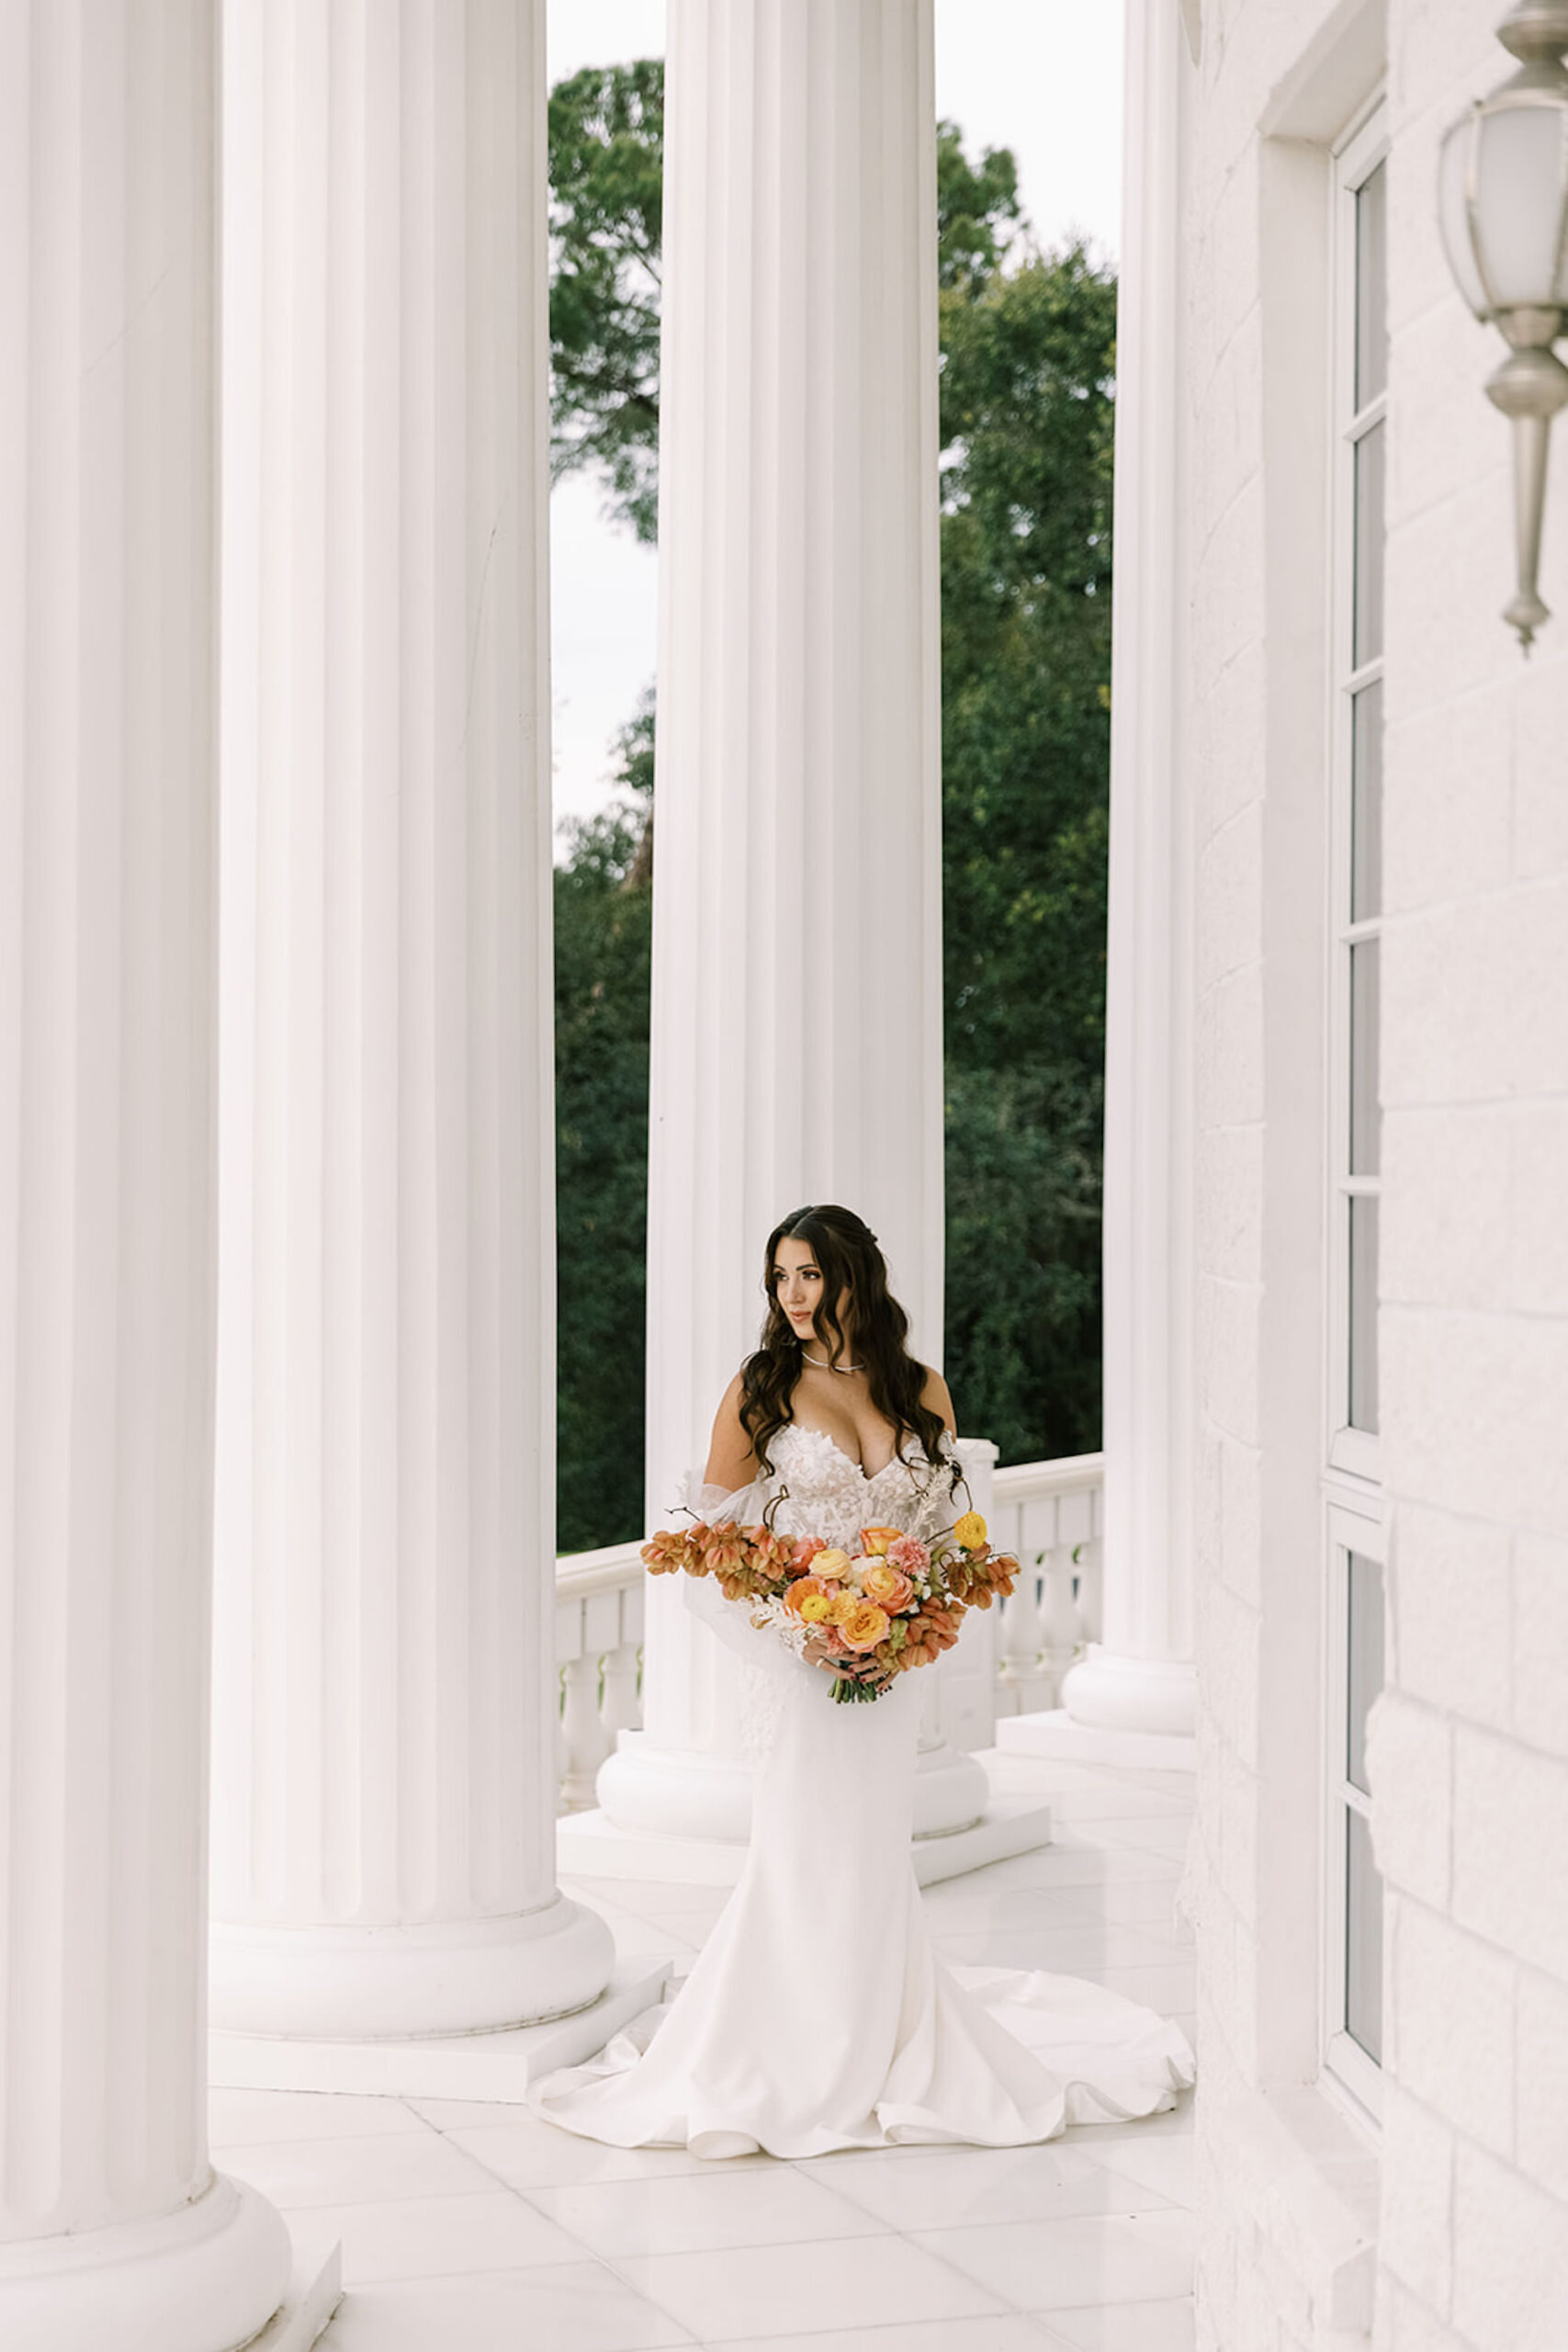 Off-the-shoulder Long Sleeve Fit and Flare Wedding Dress Inspiration | Wavy Half Up Half Down Hairstyle Ideas | Tampa Bay Hair and Makeup Artist Adore Bridal | Tarpon Springs Whitehurst Gallery